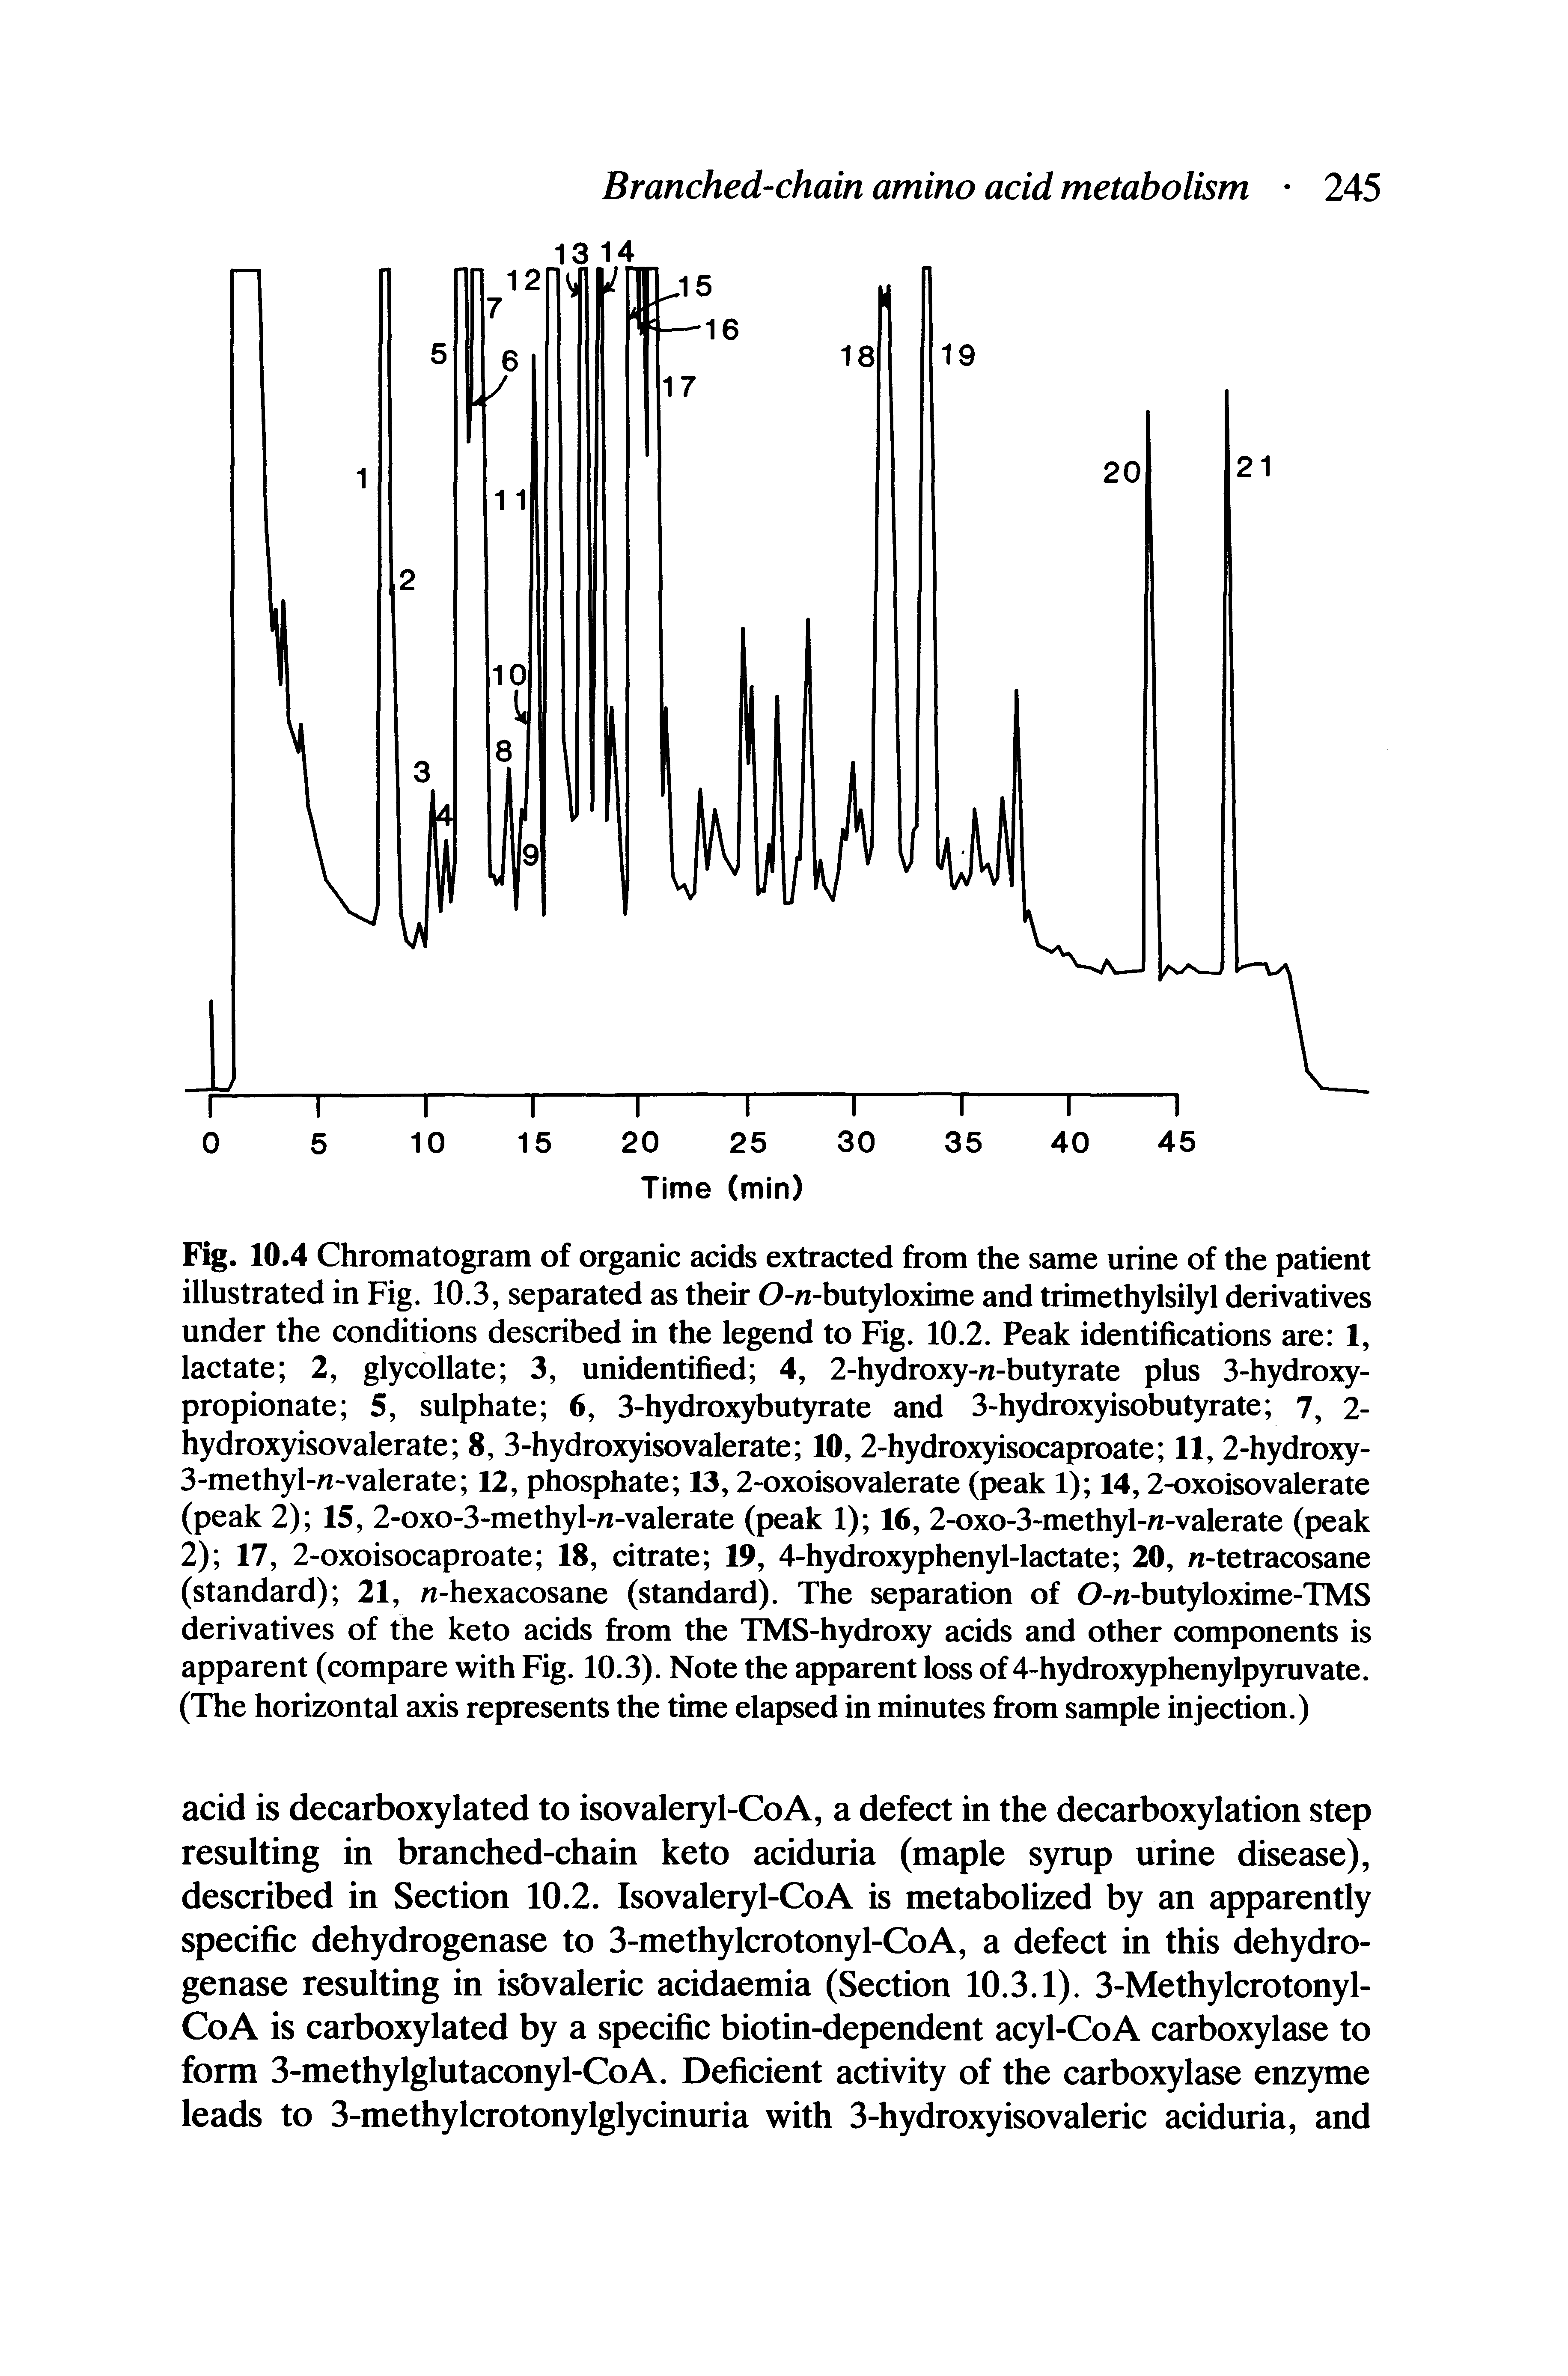 Fig. 10.4 Chromatogram of organic acids extracted from the same urine of the patient illustrated in Fig. 10.3, separated as their O-n-butyloxime and trimethylsilyl derivatives under the conditions described in the legend to Fig. 10.2. Peak identifications are 1, lactate 2, glycollate 3, unidentified 4, 2-hydroxy-n-butyrate plus 3-hydroxy-propionate 5, sulphate 6, 3-hydroxybutyrate and 3-hydroxyisobutyrate 7, 2-hydroxyisovalerate 8, 3-hydroxyisovalerate 10, 2-hydroxyisocaproate 11,2-hydroxy-3-methyl-n-valerate 12, phosphate 13,2-oxoisovalerate (peak 1) 14,2-oxoisovalerate (peak 2) 15, 2-oxo-3-methyl-/i-valerate (peak 1) 16, 2-oxo-3-methyl-n-valerate (peak 2) 17, 2-oxoisocaproate 18, citrate 19, 4-hydroxyphenyl-lactate 20, n-tetracosane (standard) 21, n-hexacosane (standard). The separation of O-n-butyloxime-TMS derivatives of the keto acids from the TMS-hydroxy acids and other components is apparent (compare with Fig. 10.3). Note the apparent loss of 4-hydroxyphenylpyruvate. (The horizontal axis represents the time elapsed in minutes from sample injection.)...